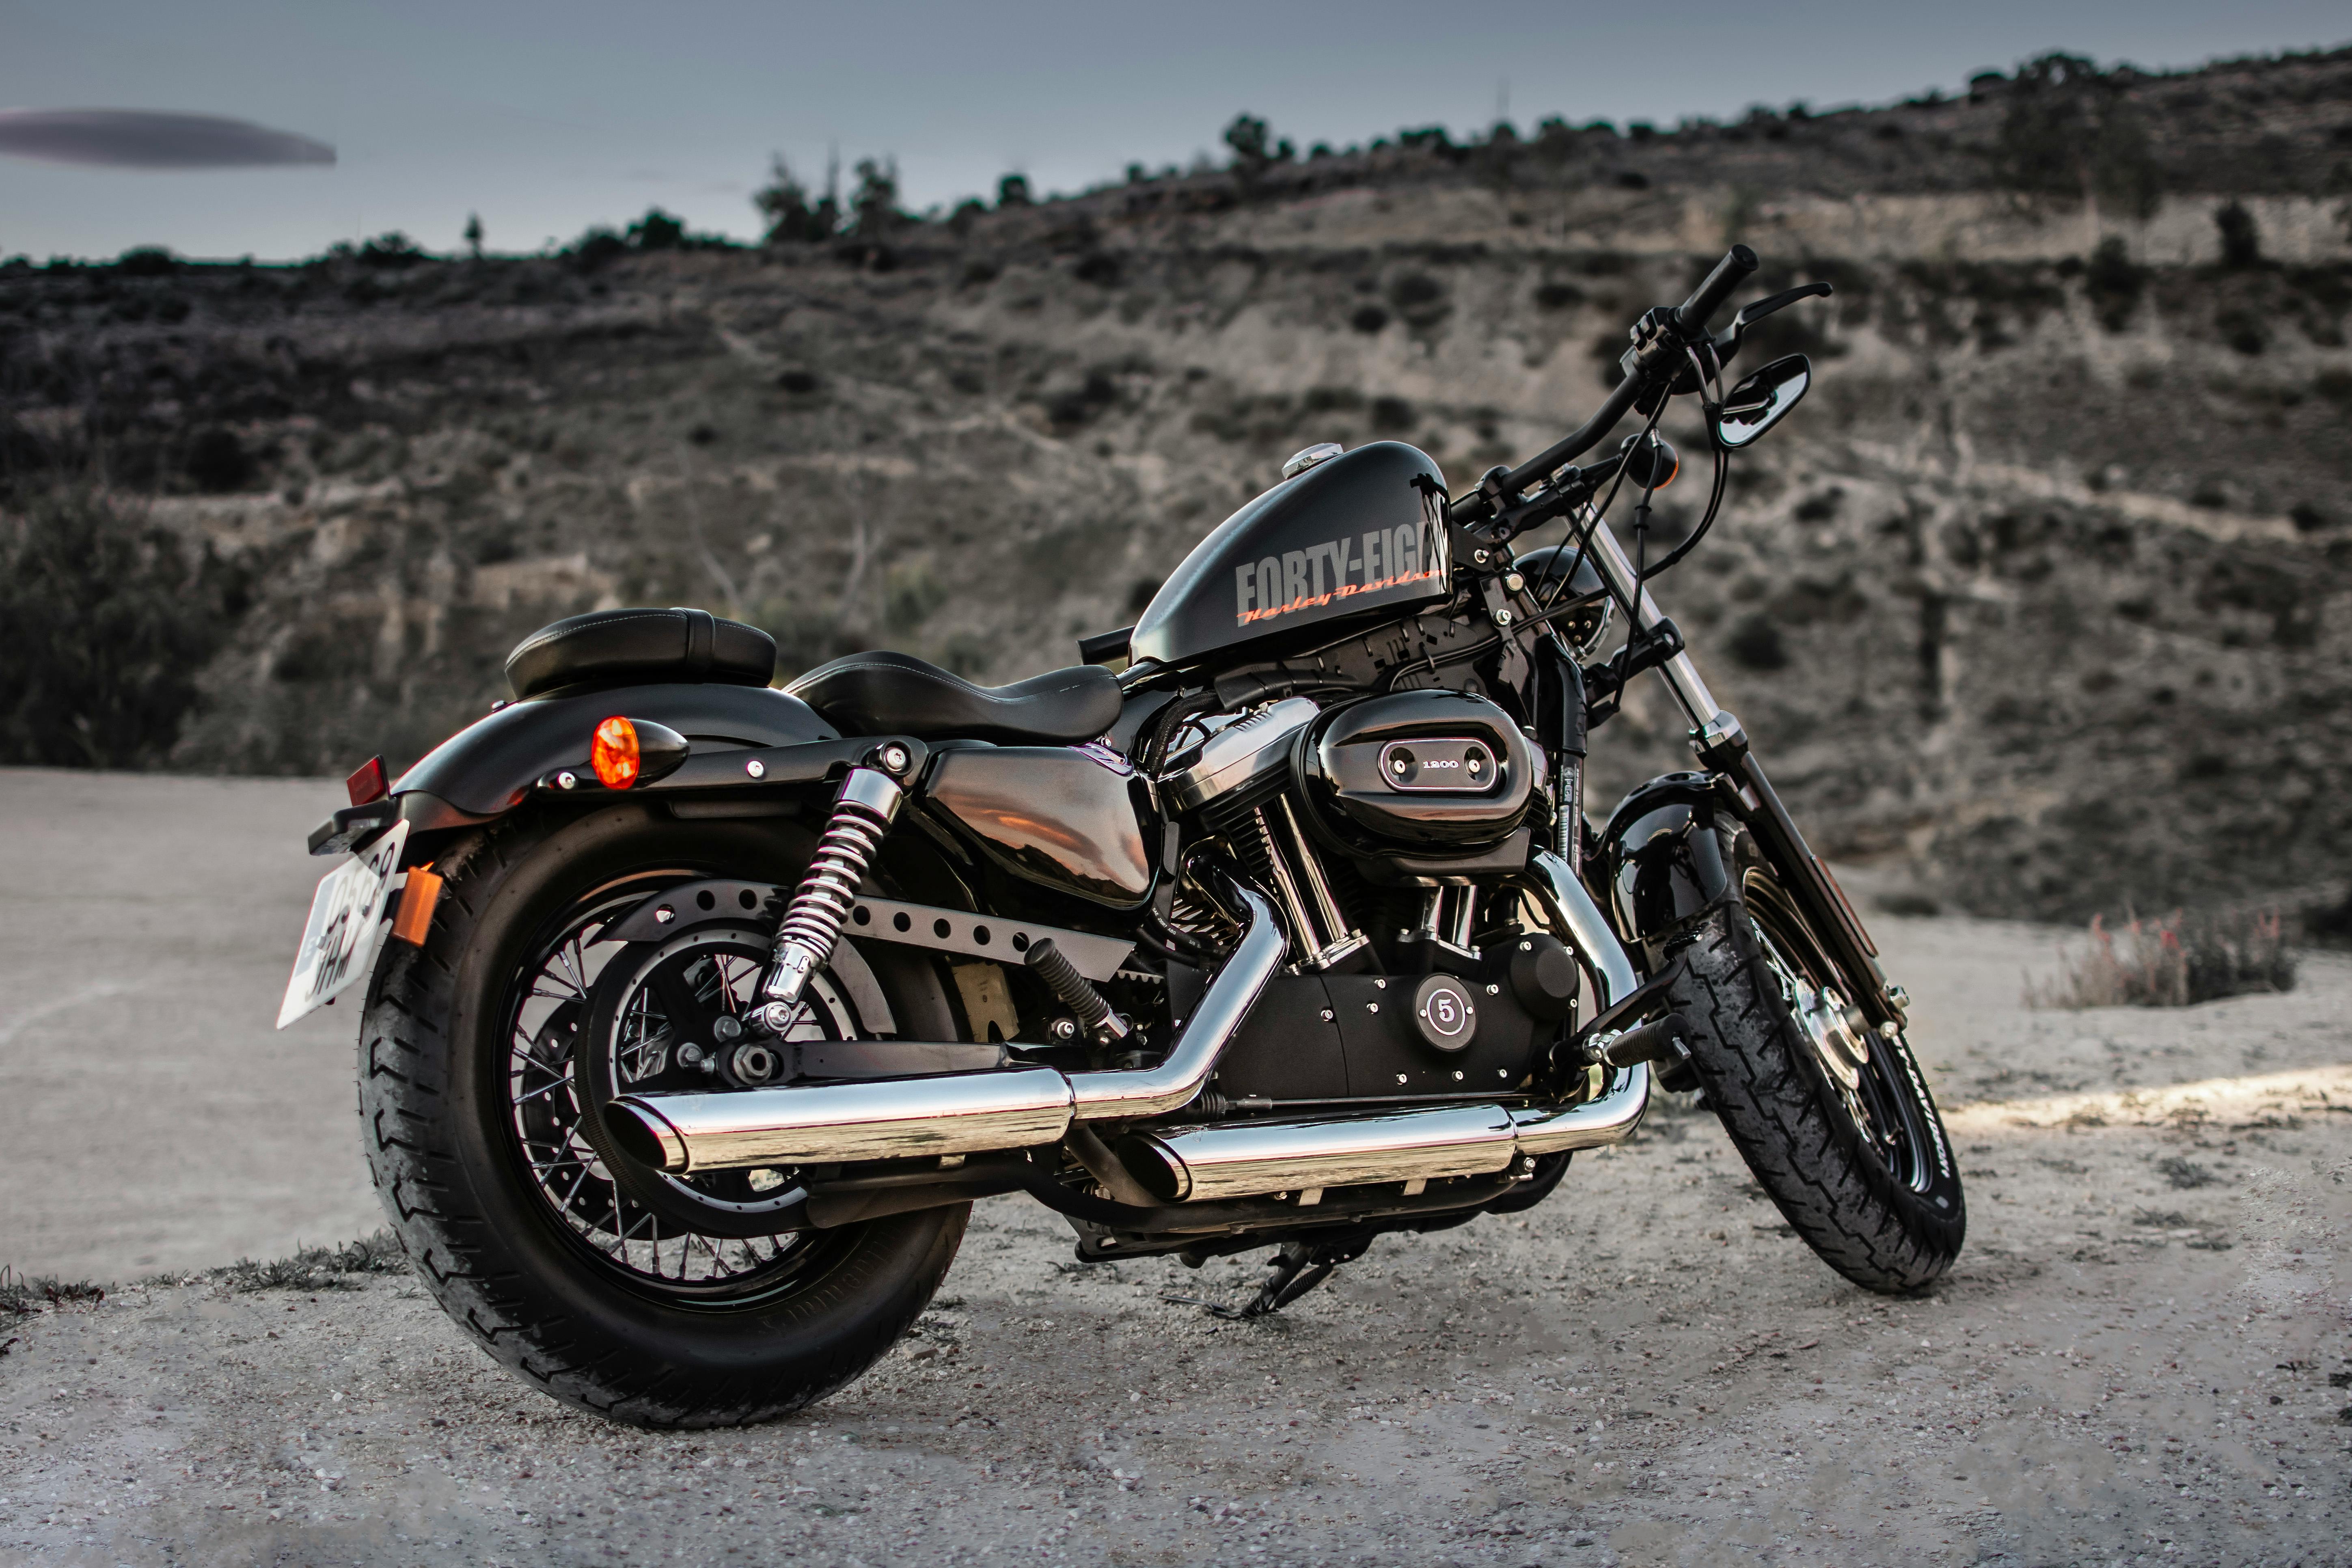 Harley Davidson Photos, Download The BEST Free Harley Davidson Stock Photos  & HD Images